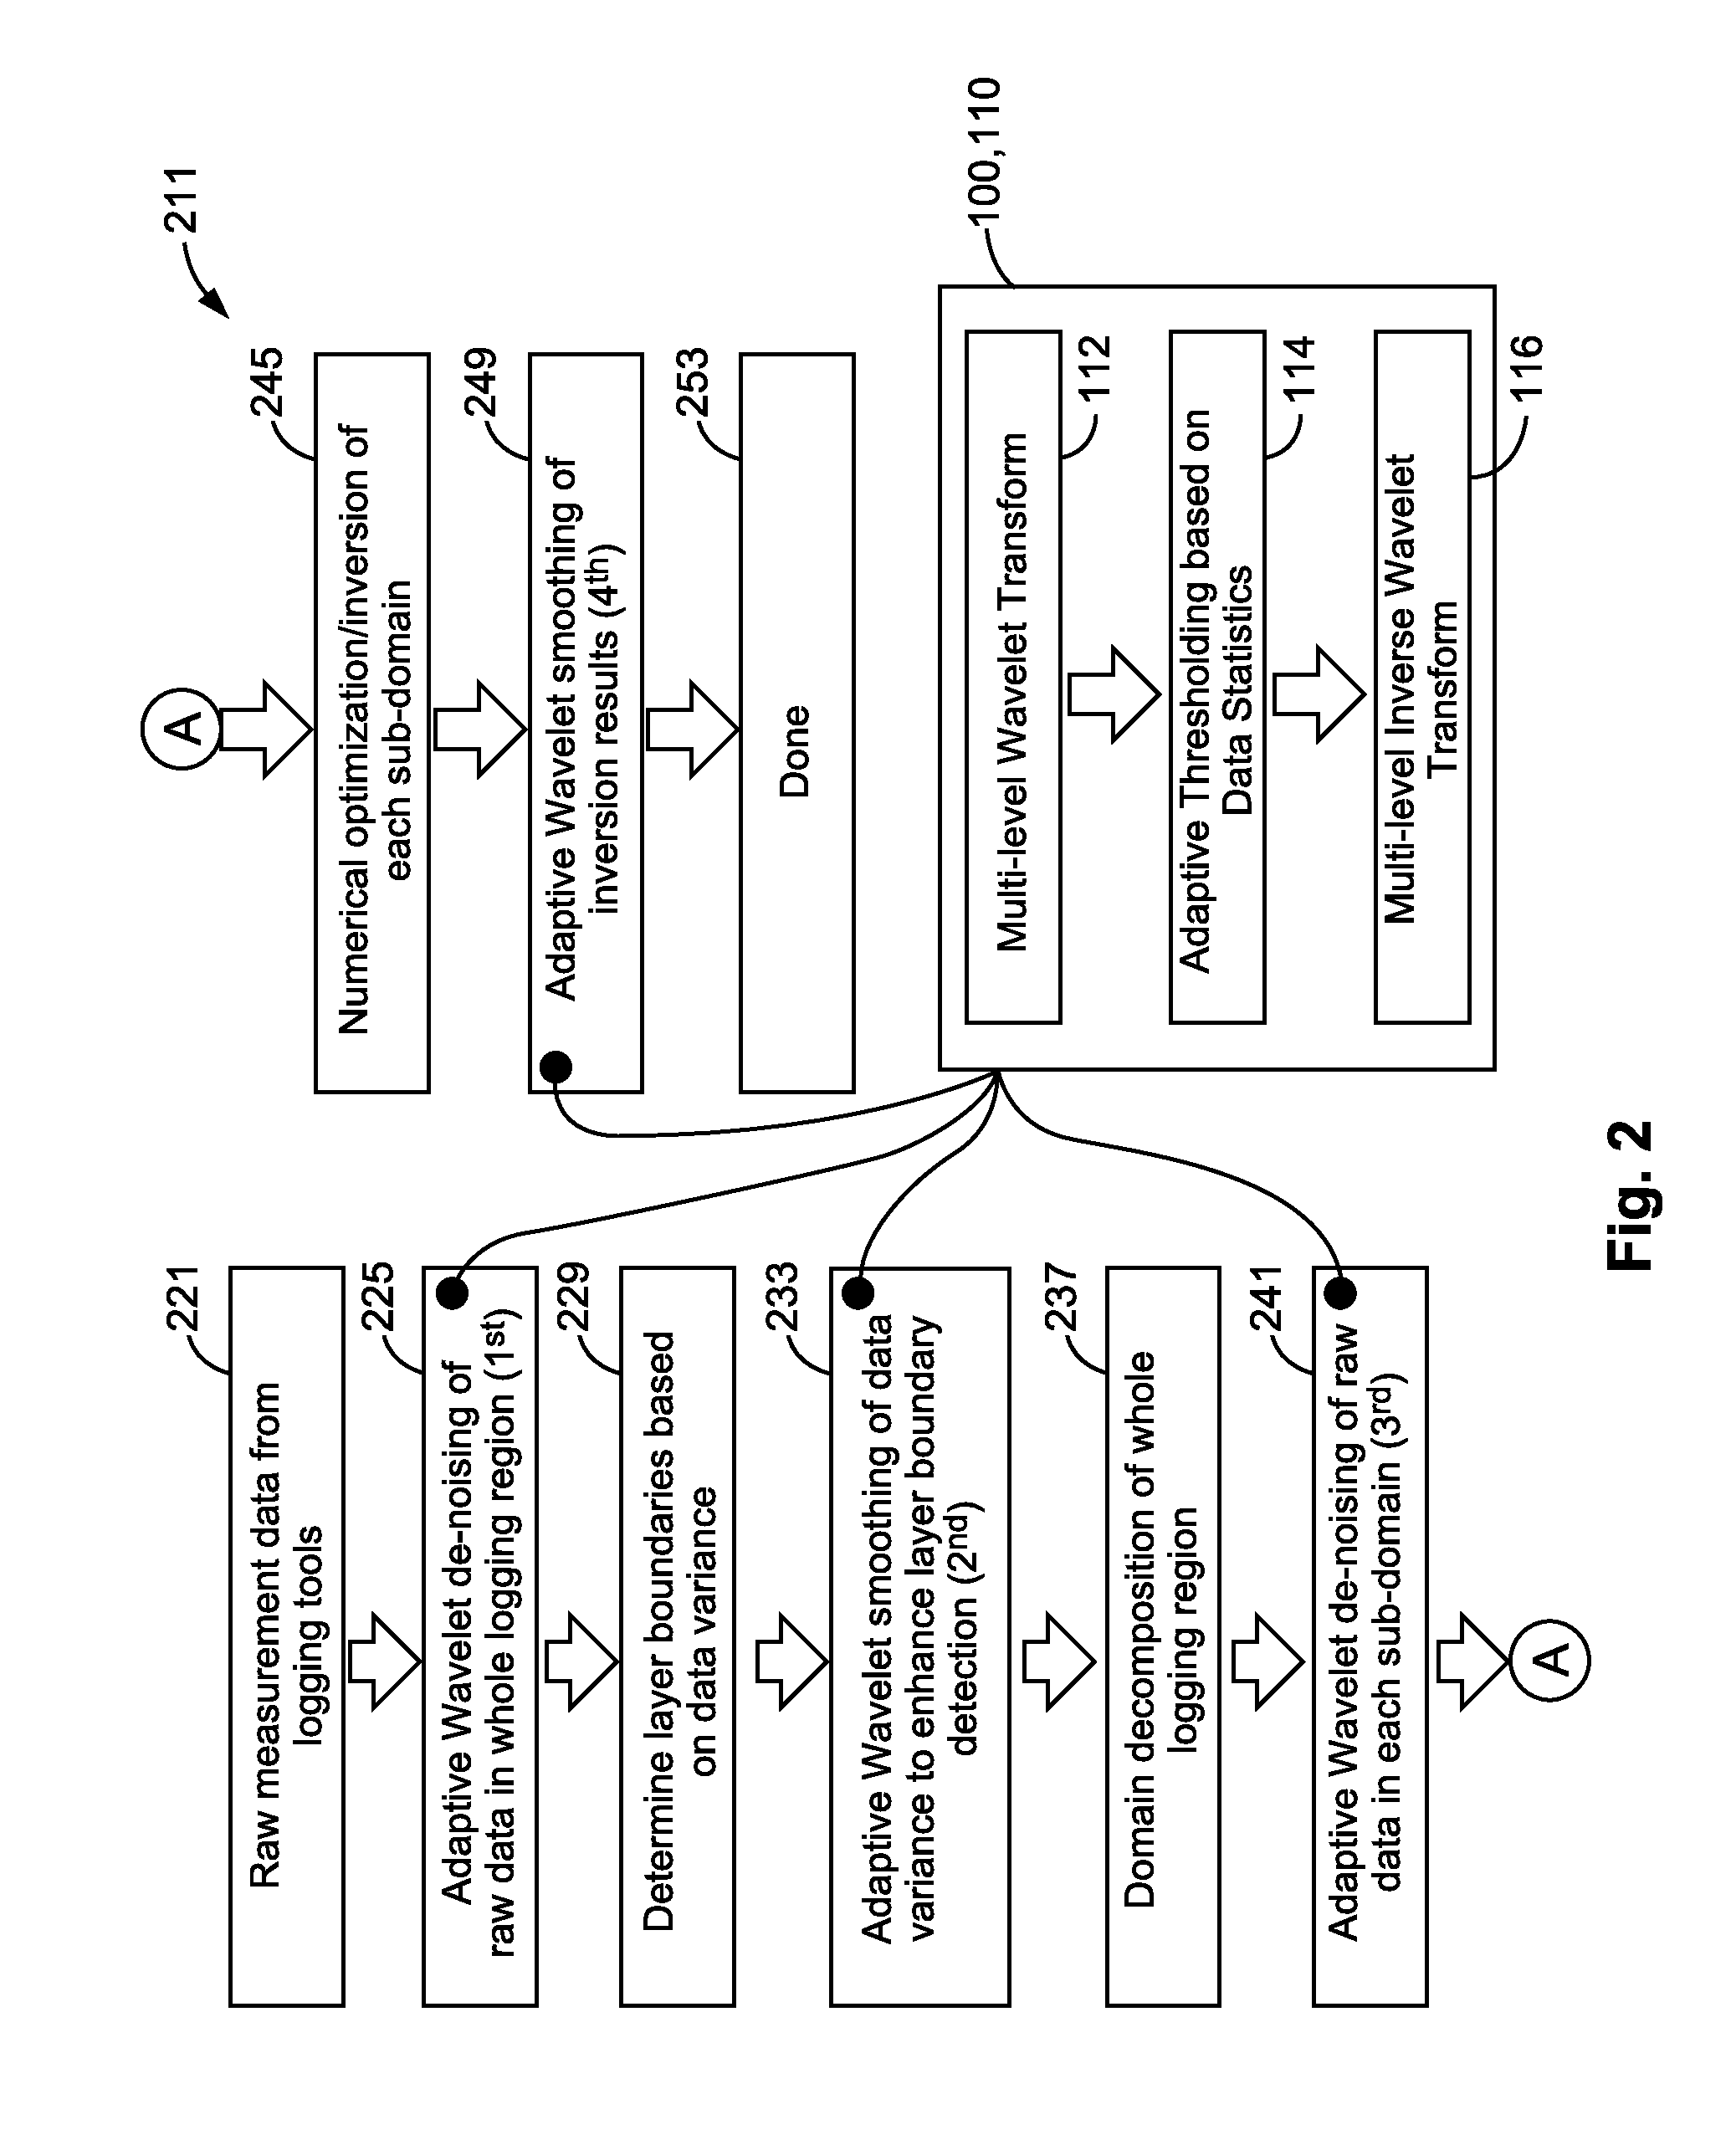 Measurement transformation apparatus, methods, and systems